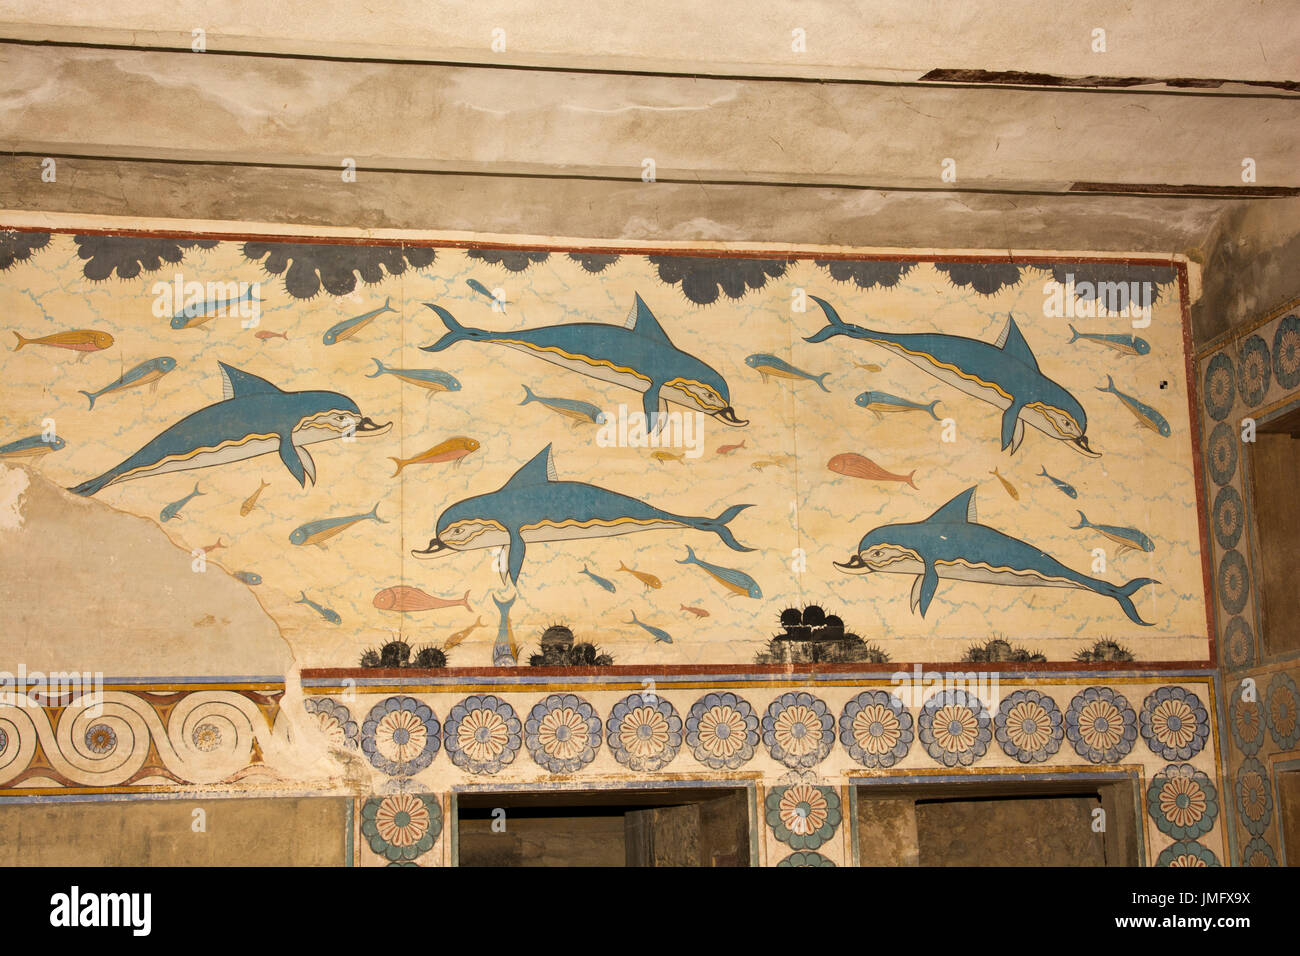 The Palace of Knossos was the ceremonial and political centre of the Minoan civilization and culture. Here the queen's megaron with dolphin frescoes. Stock Photo